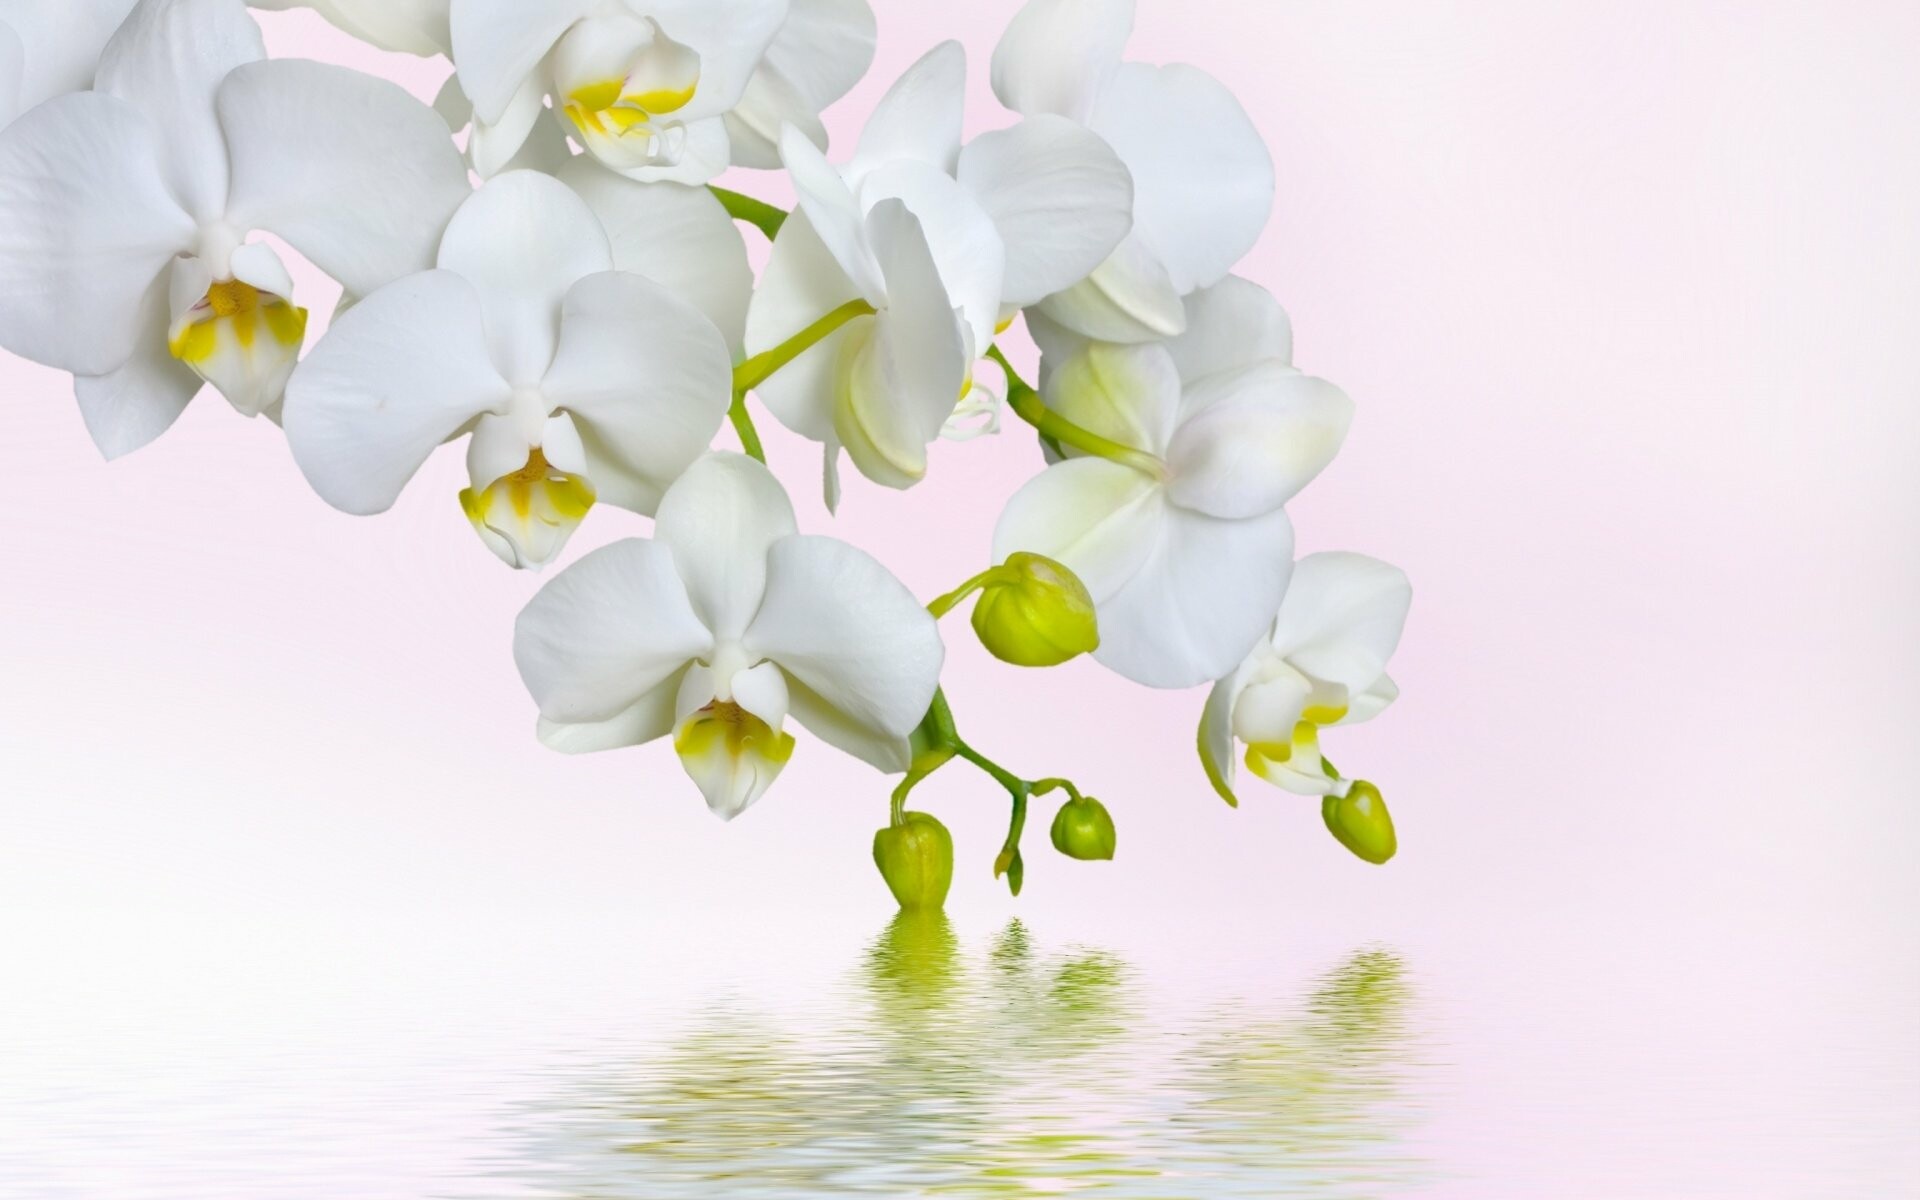 Orchid: Depending on the variety, an orchid's petals can have ruffled or notched edges. 1920x1200 HD Wallpaper.